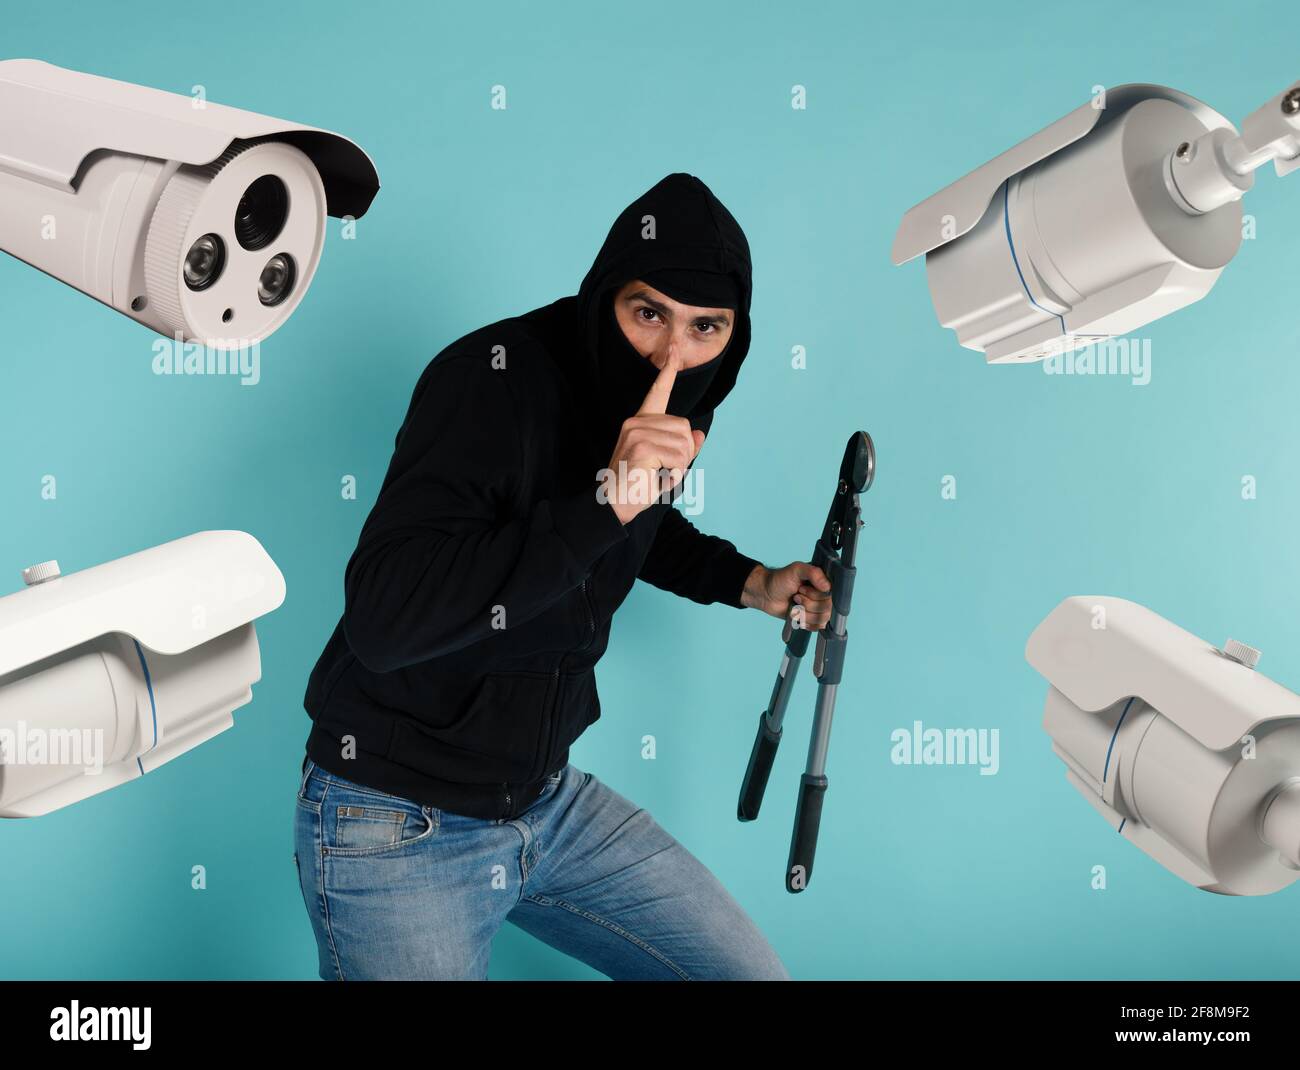 Thief with balaclava was spotted trying to steal in a apartment from the video surveillance system. Stock Photo